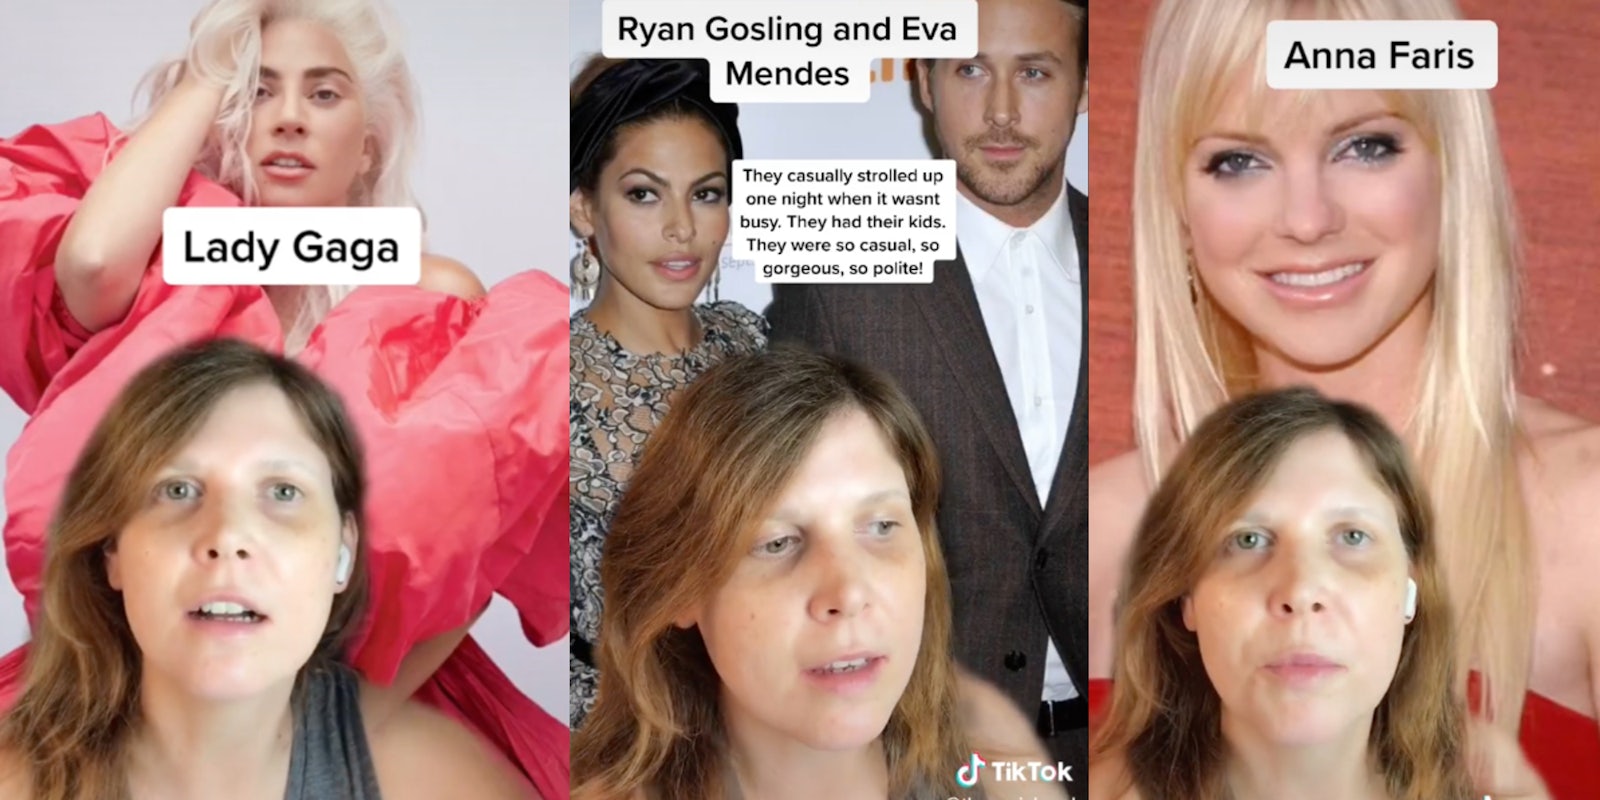 tiktoker with lady gaga, eva mendes, ryan gosling, and anna faris in the background